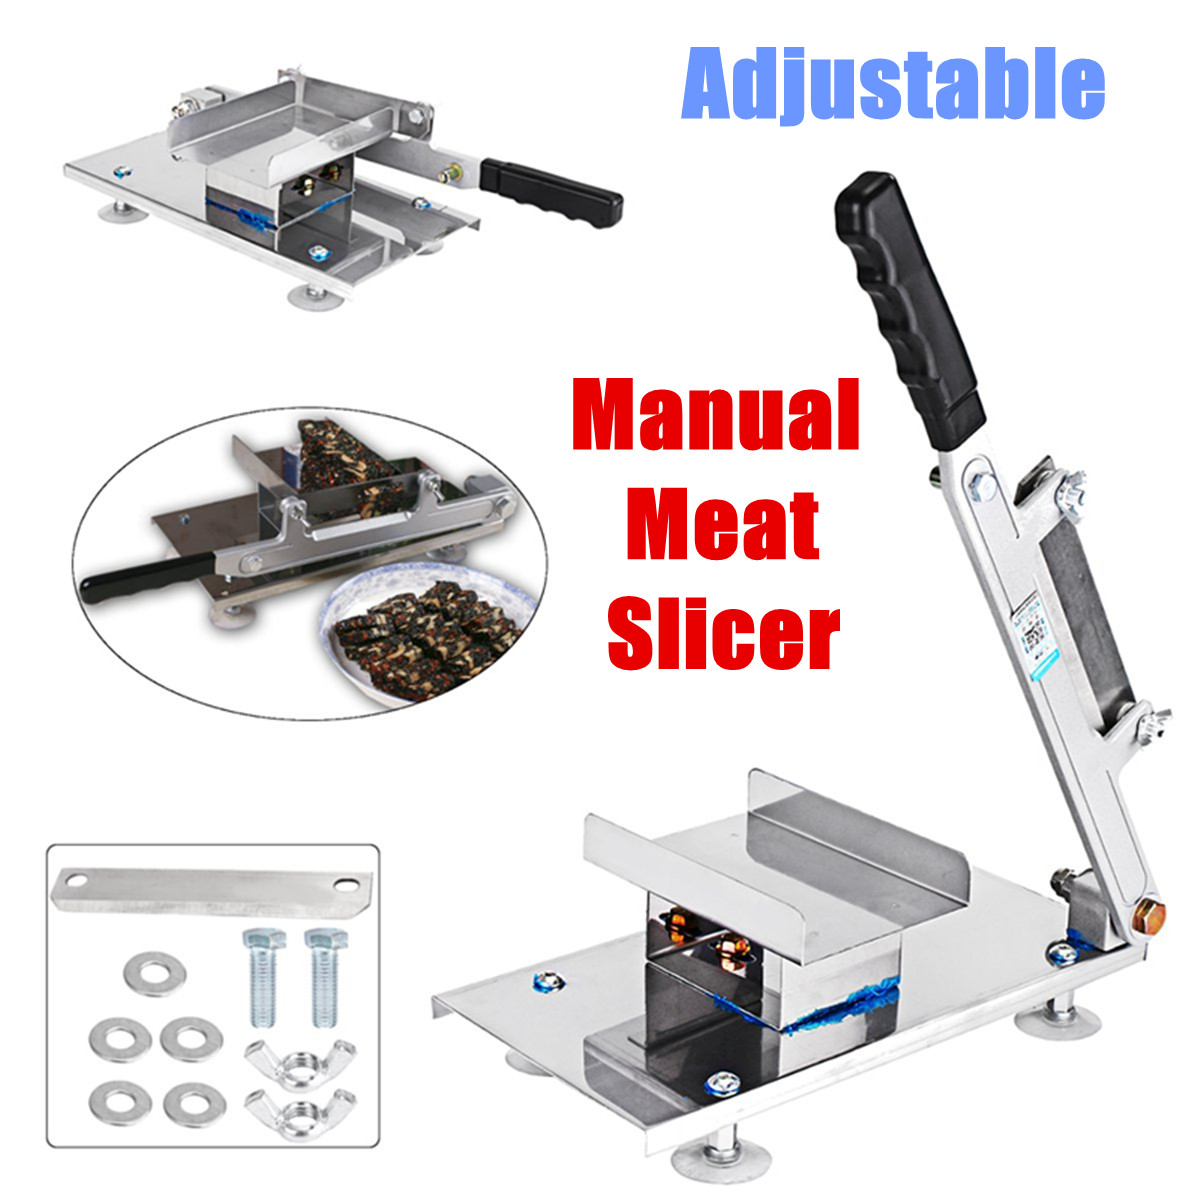 Adjustable-Manual-Frozen-Food-Meat-Slicer-Cutter-Beef-Mutton-Food-Handle-Cutting-Machine-1365937-1